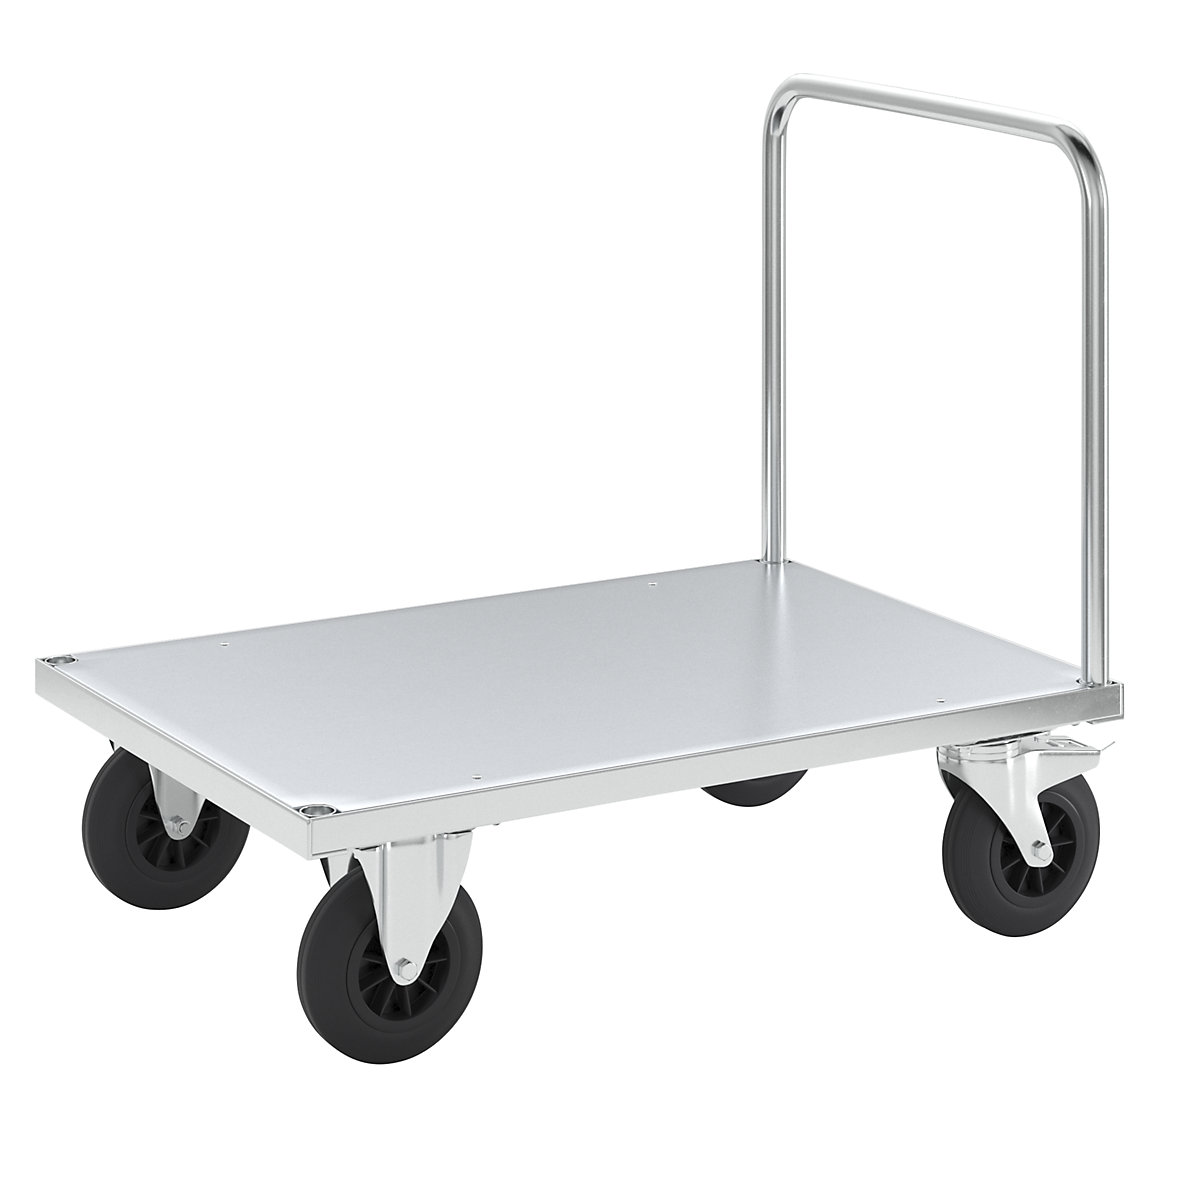 Platform truck max. load 500 kg – Kongamek, with 1 push handle, LxWxH 1000 x 700 x 900 mm, with stop-8